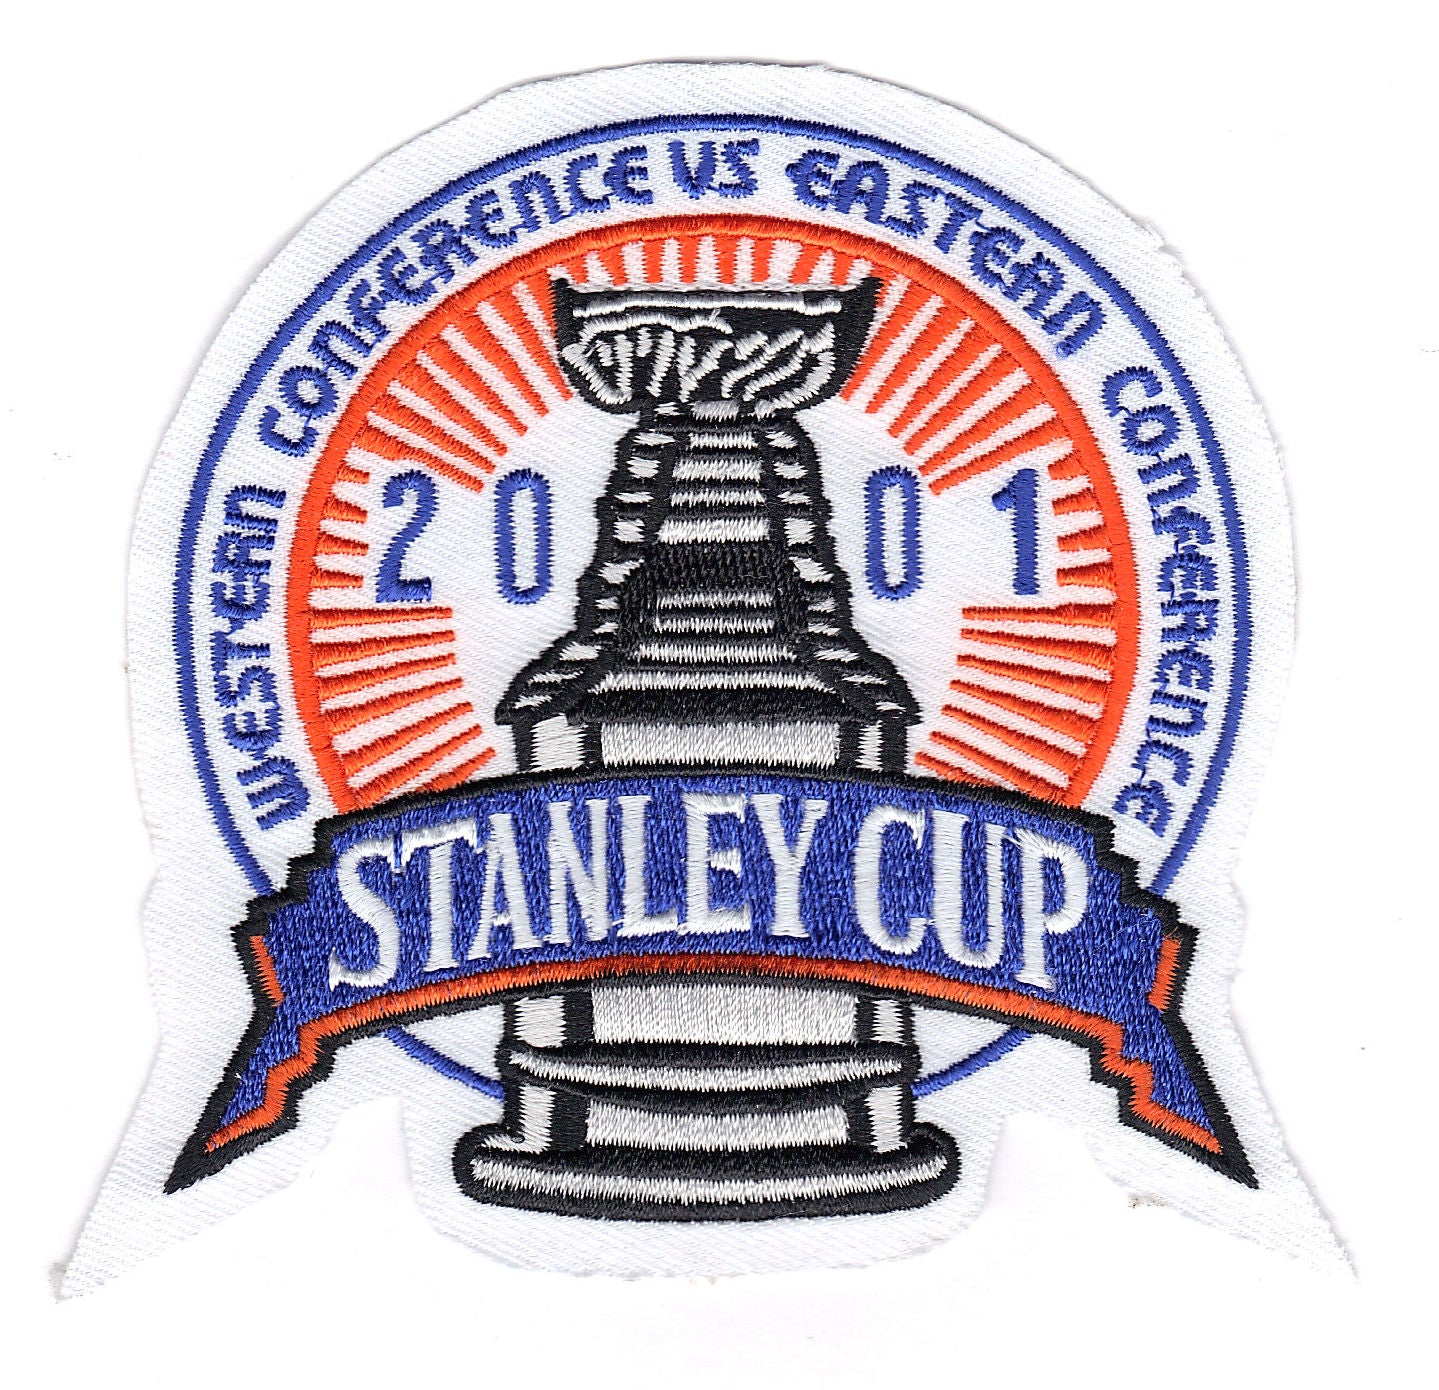 A New Stanley Cup Logo For The NHL Postseason